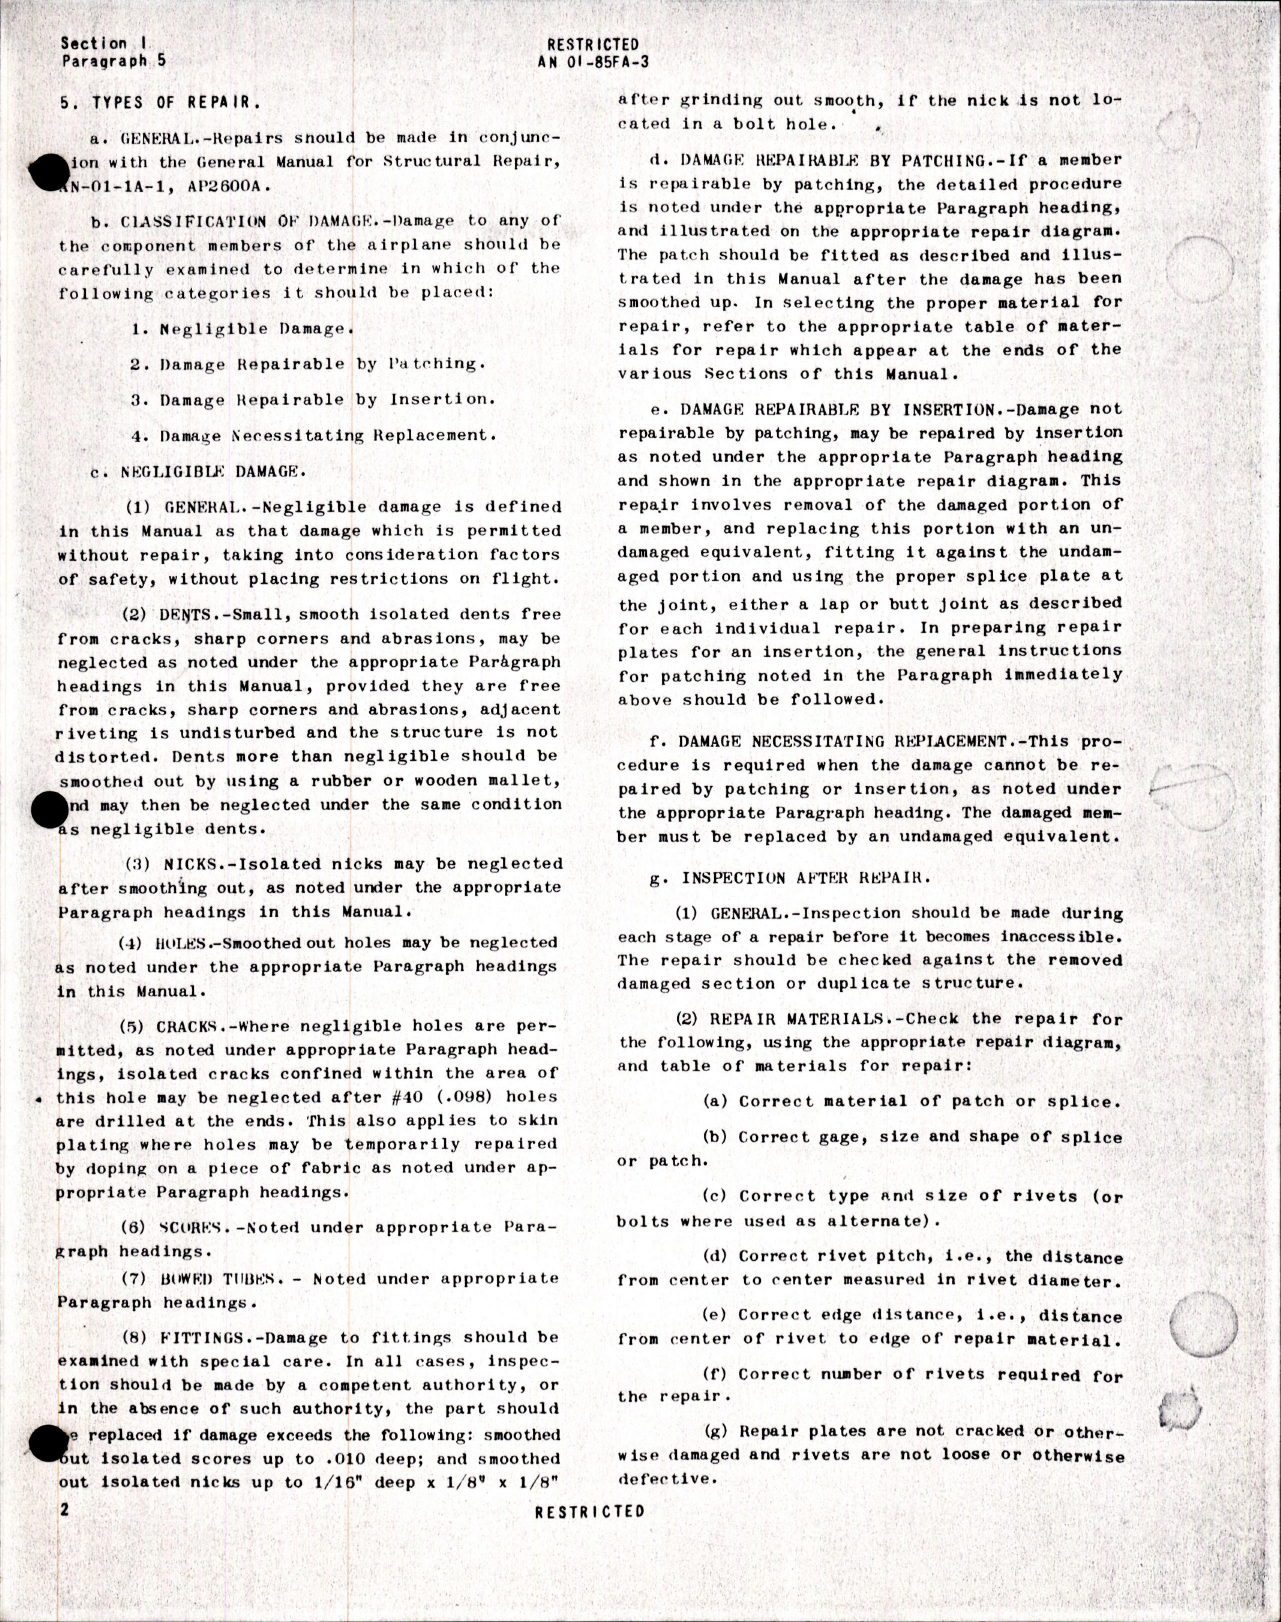 Sample page 9 from AirCorps Library document: Structural Repair Instructions for F7F-1N, F7F-2N, F7F-3, F7F-3N, and F7F-4N